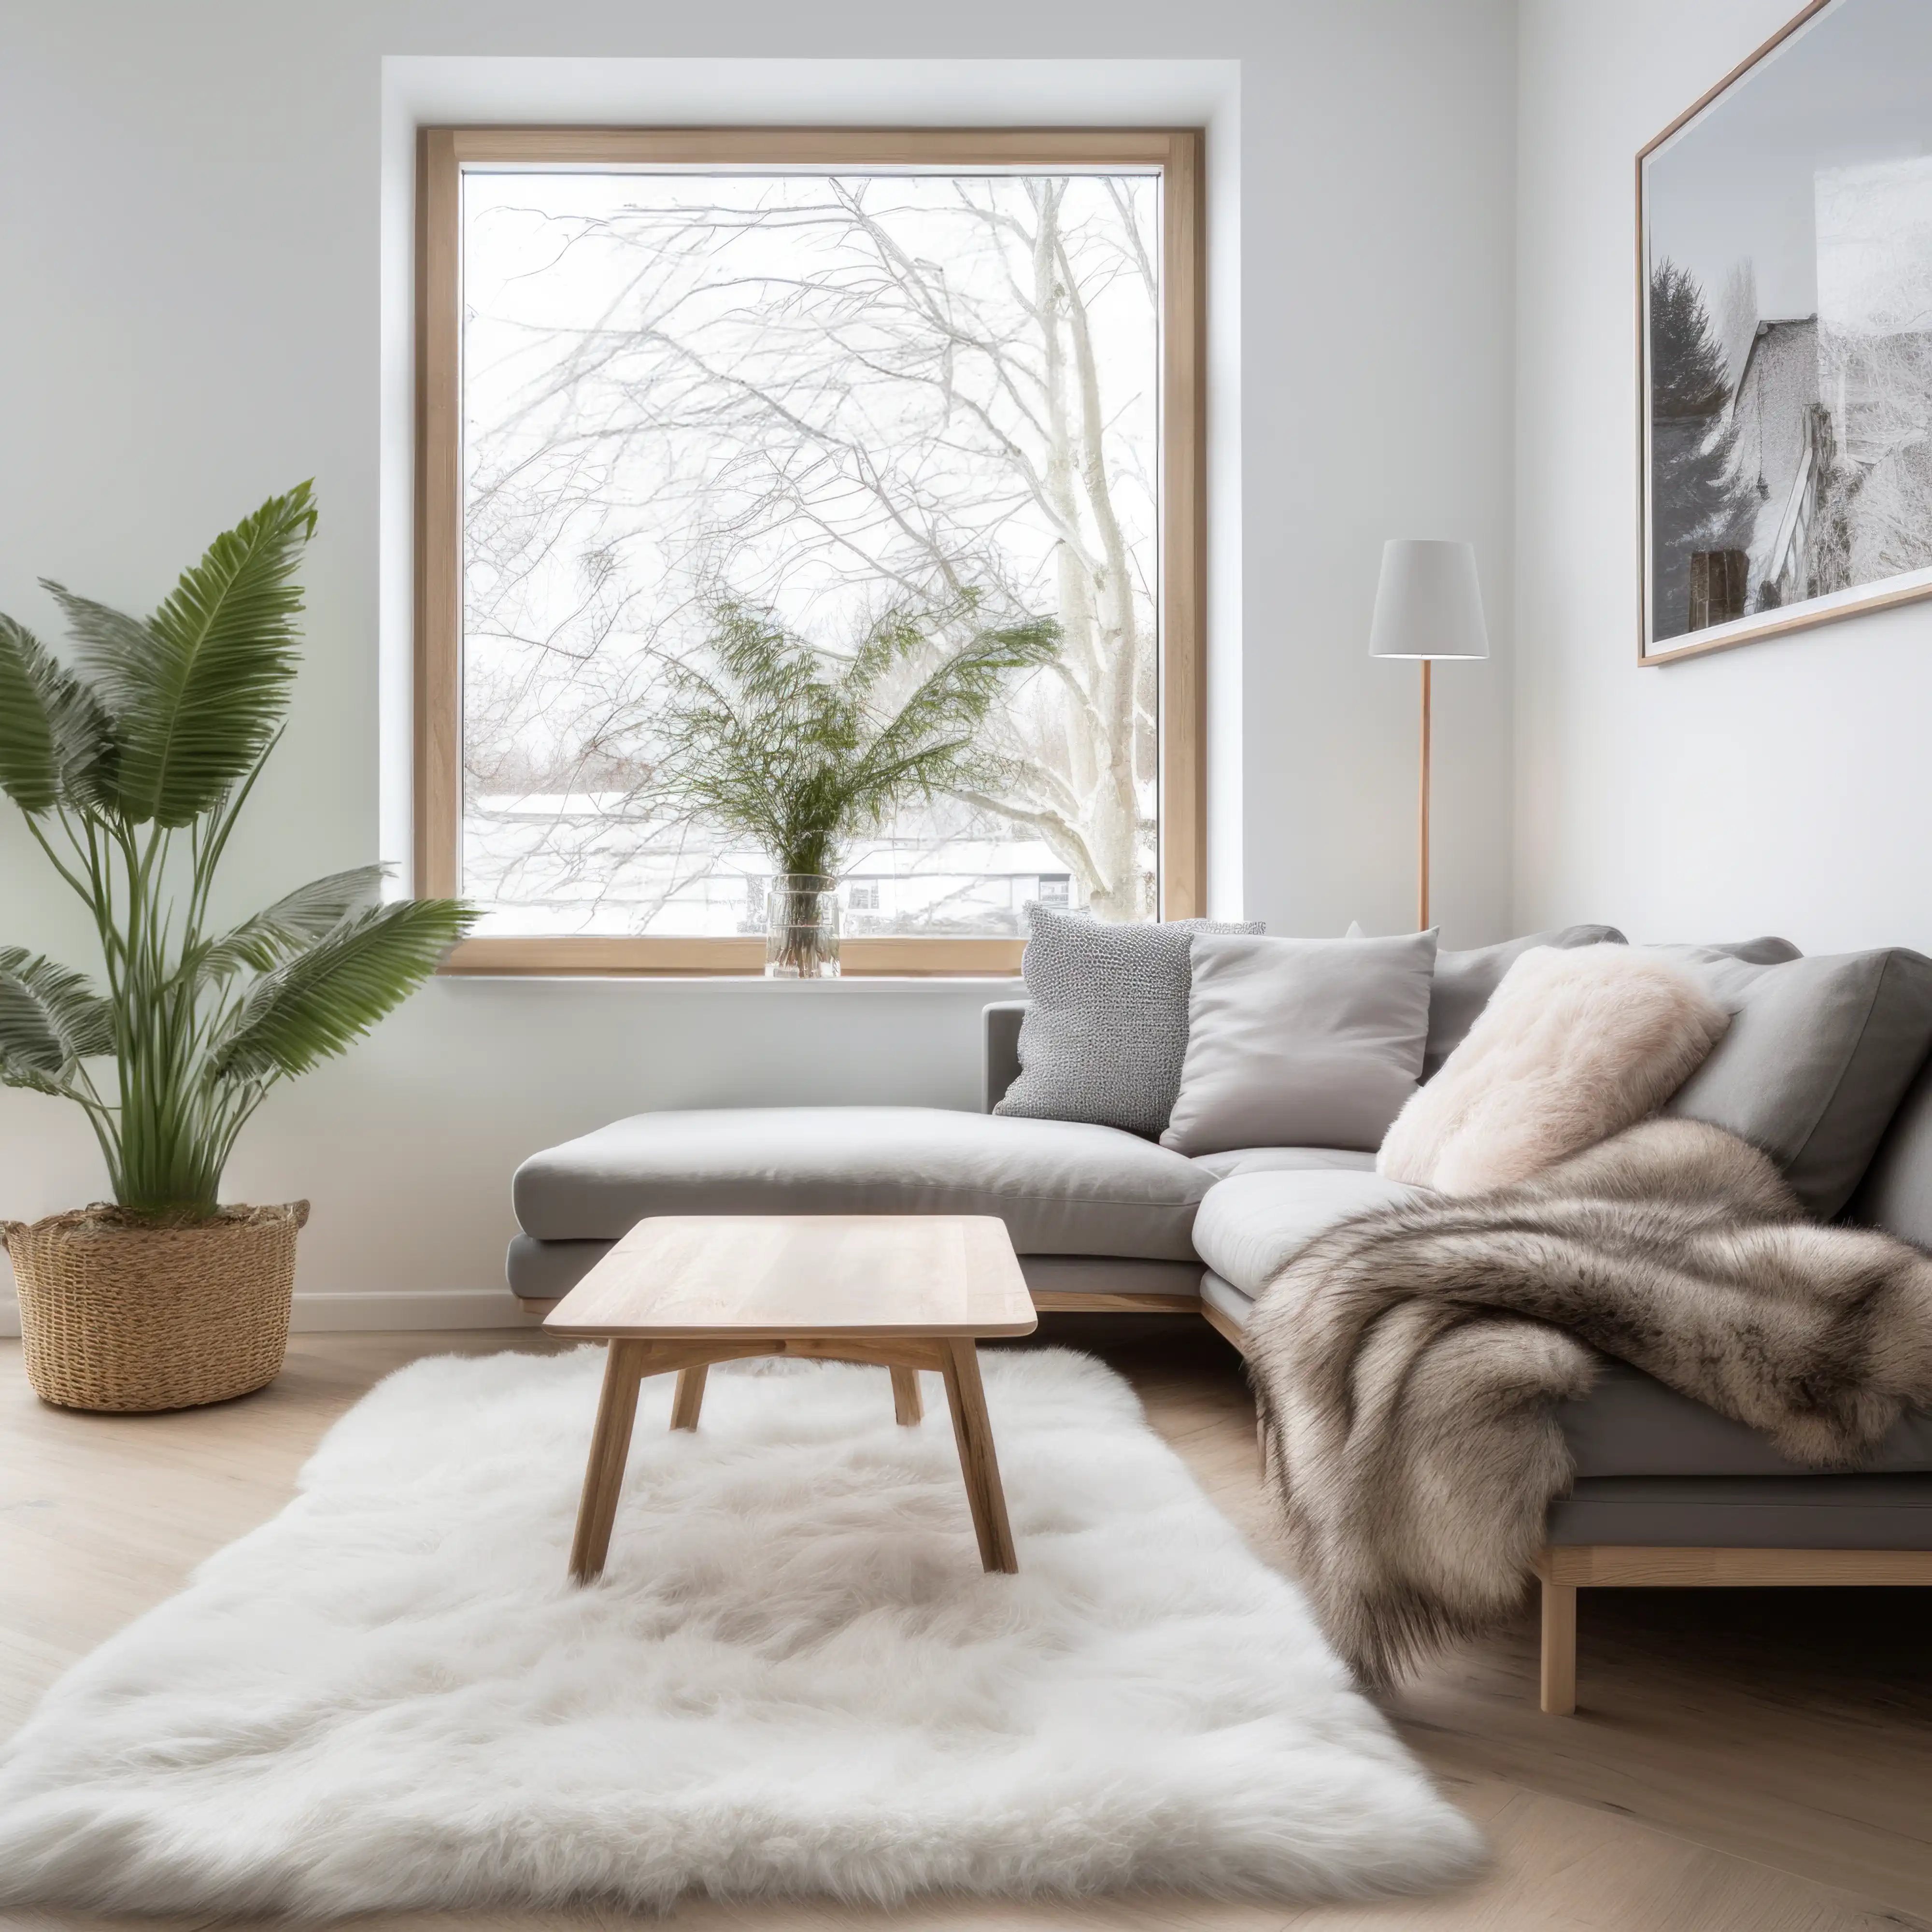 Modern living space with a large window, neutral-toned furniture, and a furry white rug, interior by Sarah Brown Design